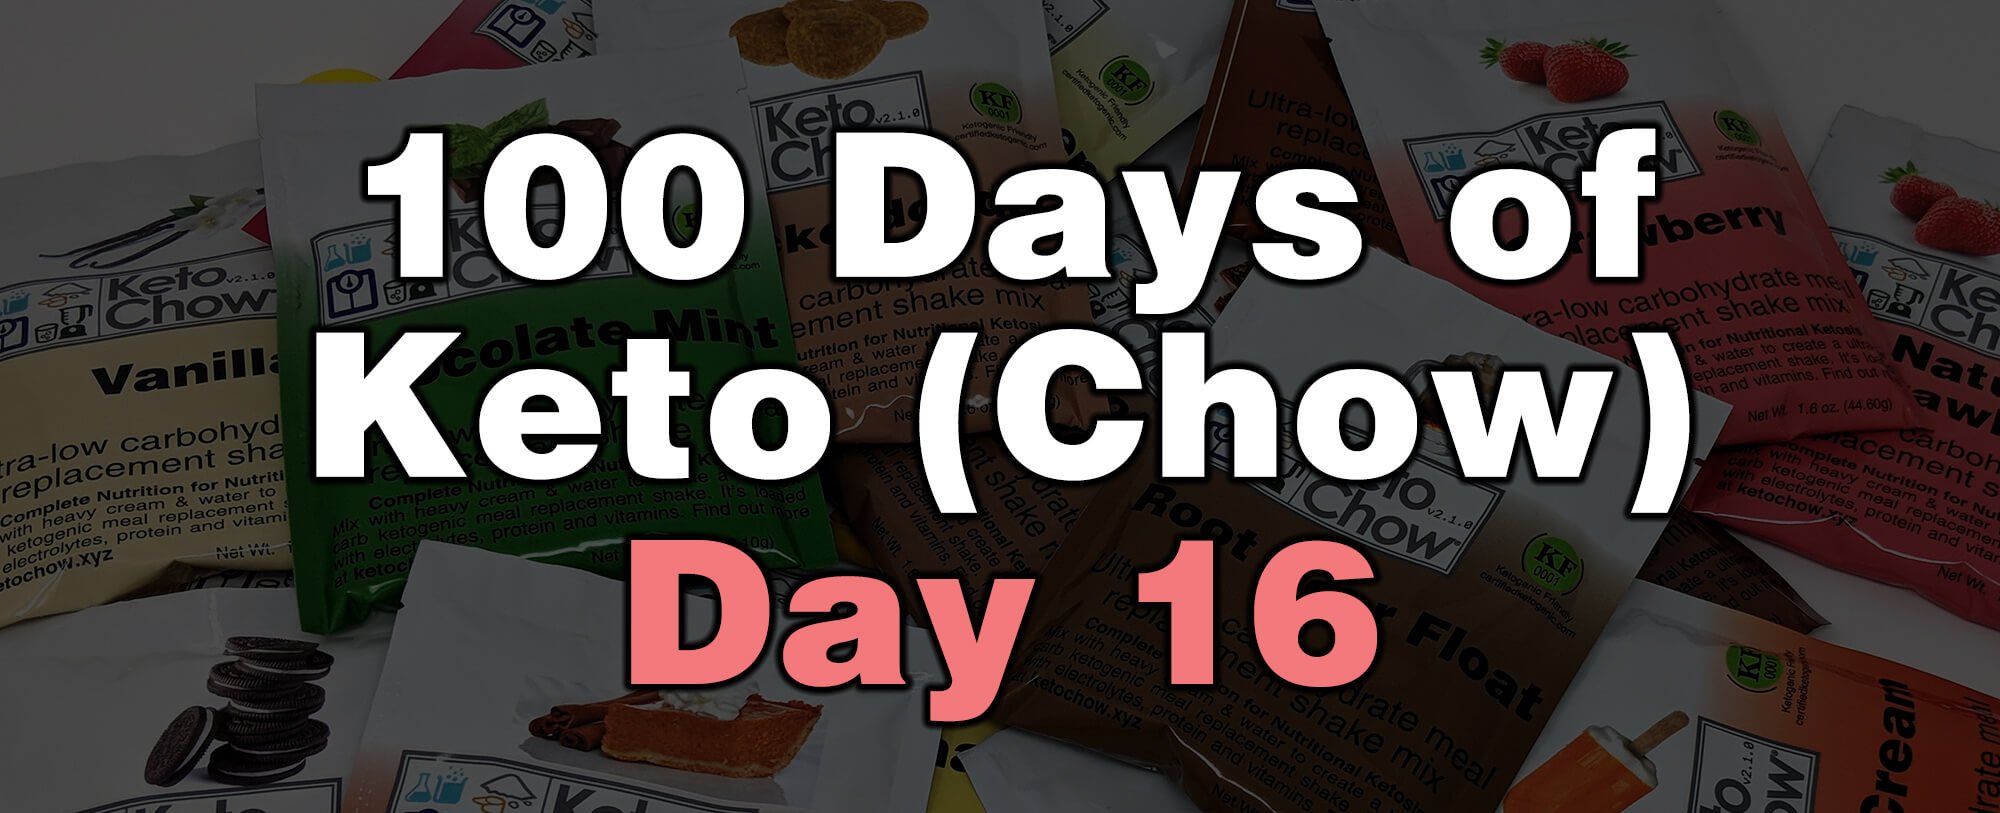 100 days of keto chow day 16